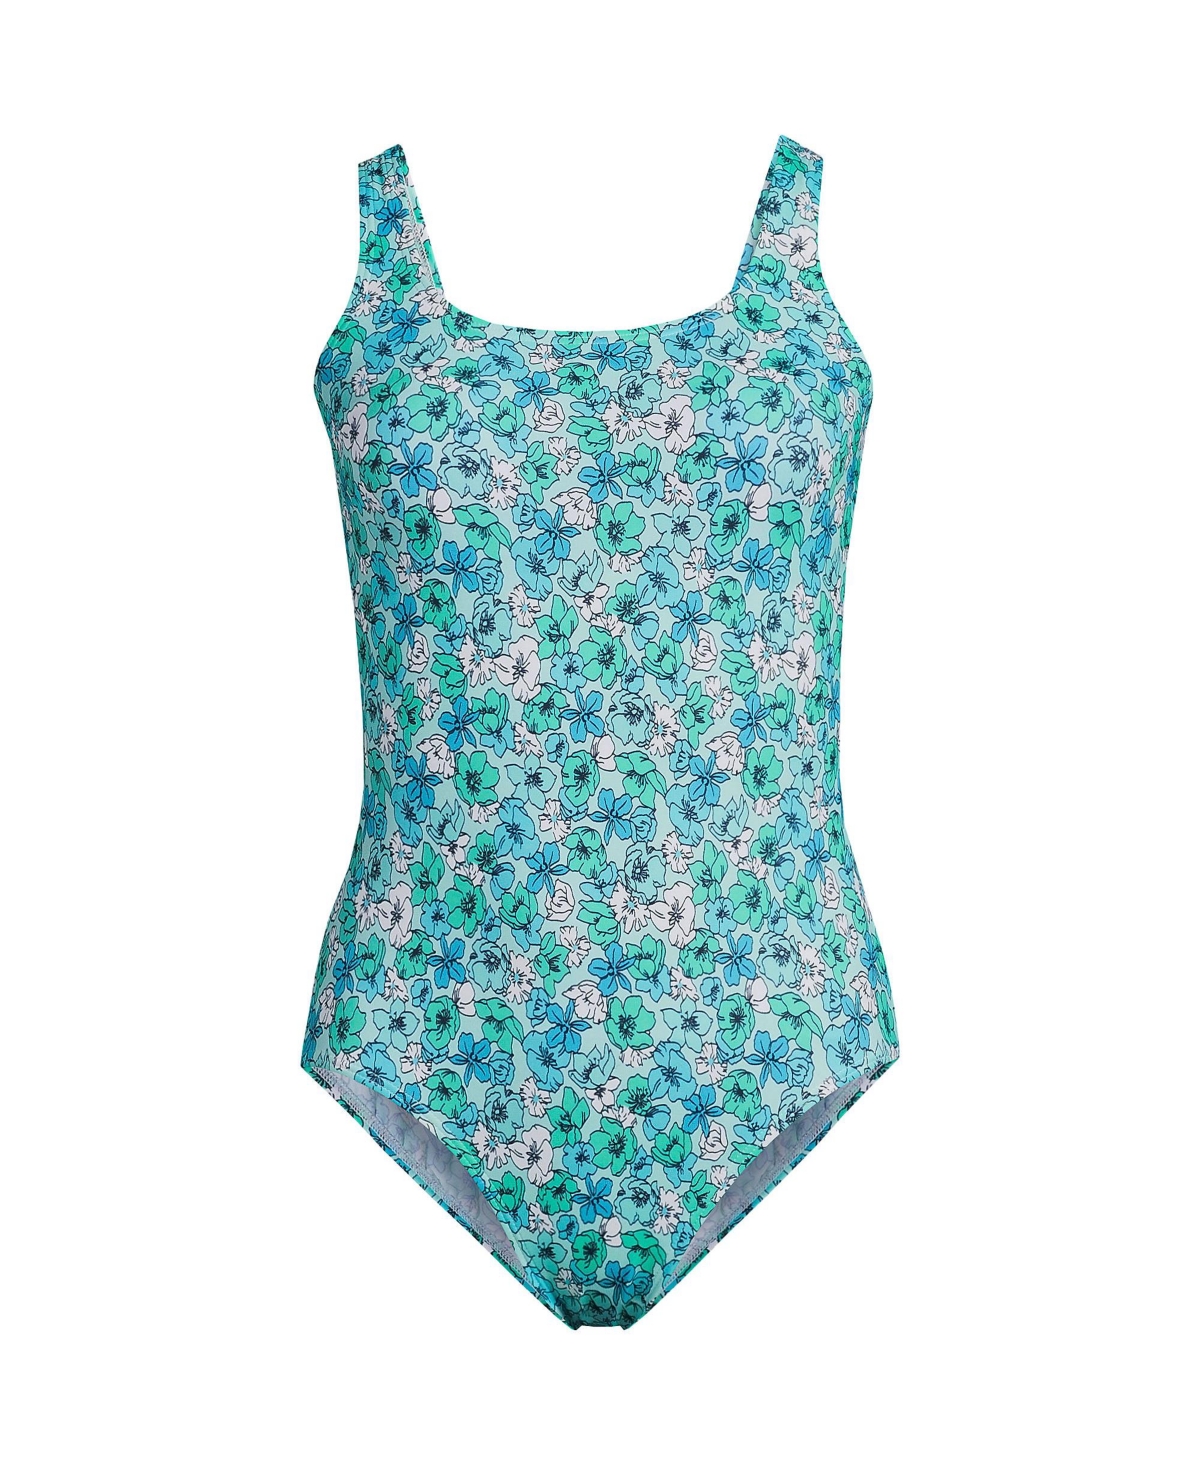 Women's Plus Size Chlorine Resistant Smocked Square Neck One Piece Swimsuit  with Adjustable Straps